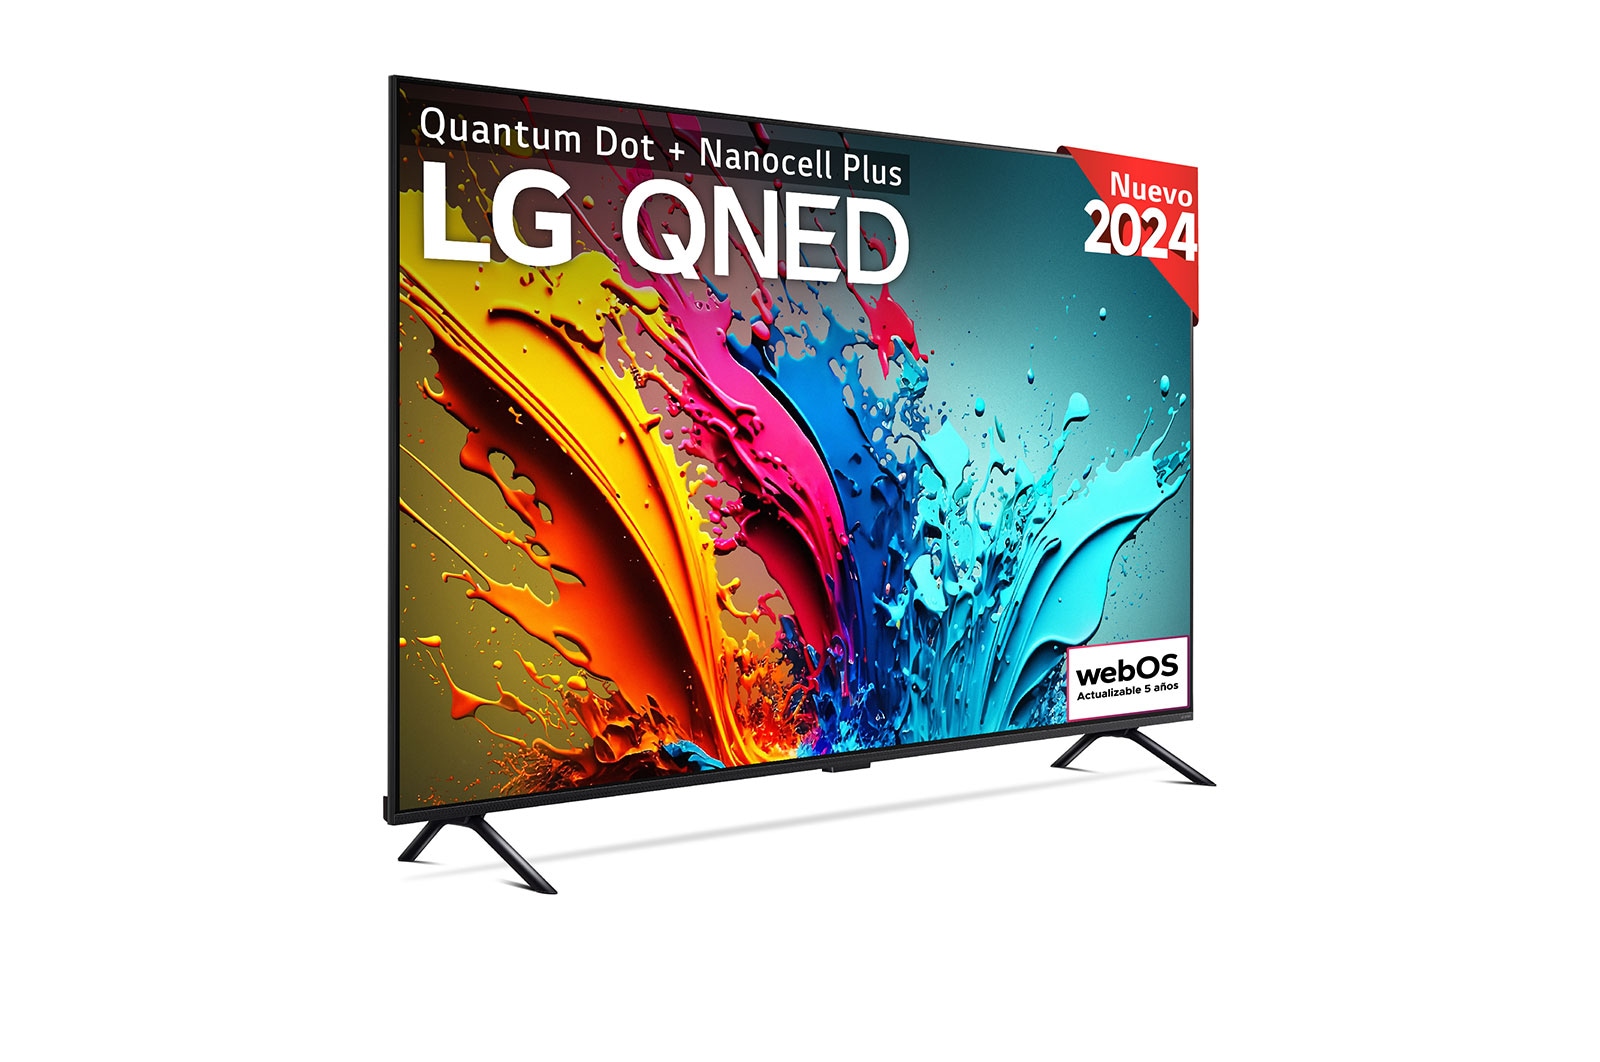 LG 98 pulgadas TV LG QNED 4K serie AI QNED89  con Smart TV WebOS24, 98QNED89T6A